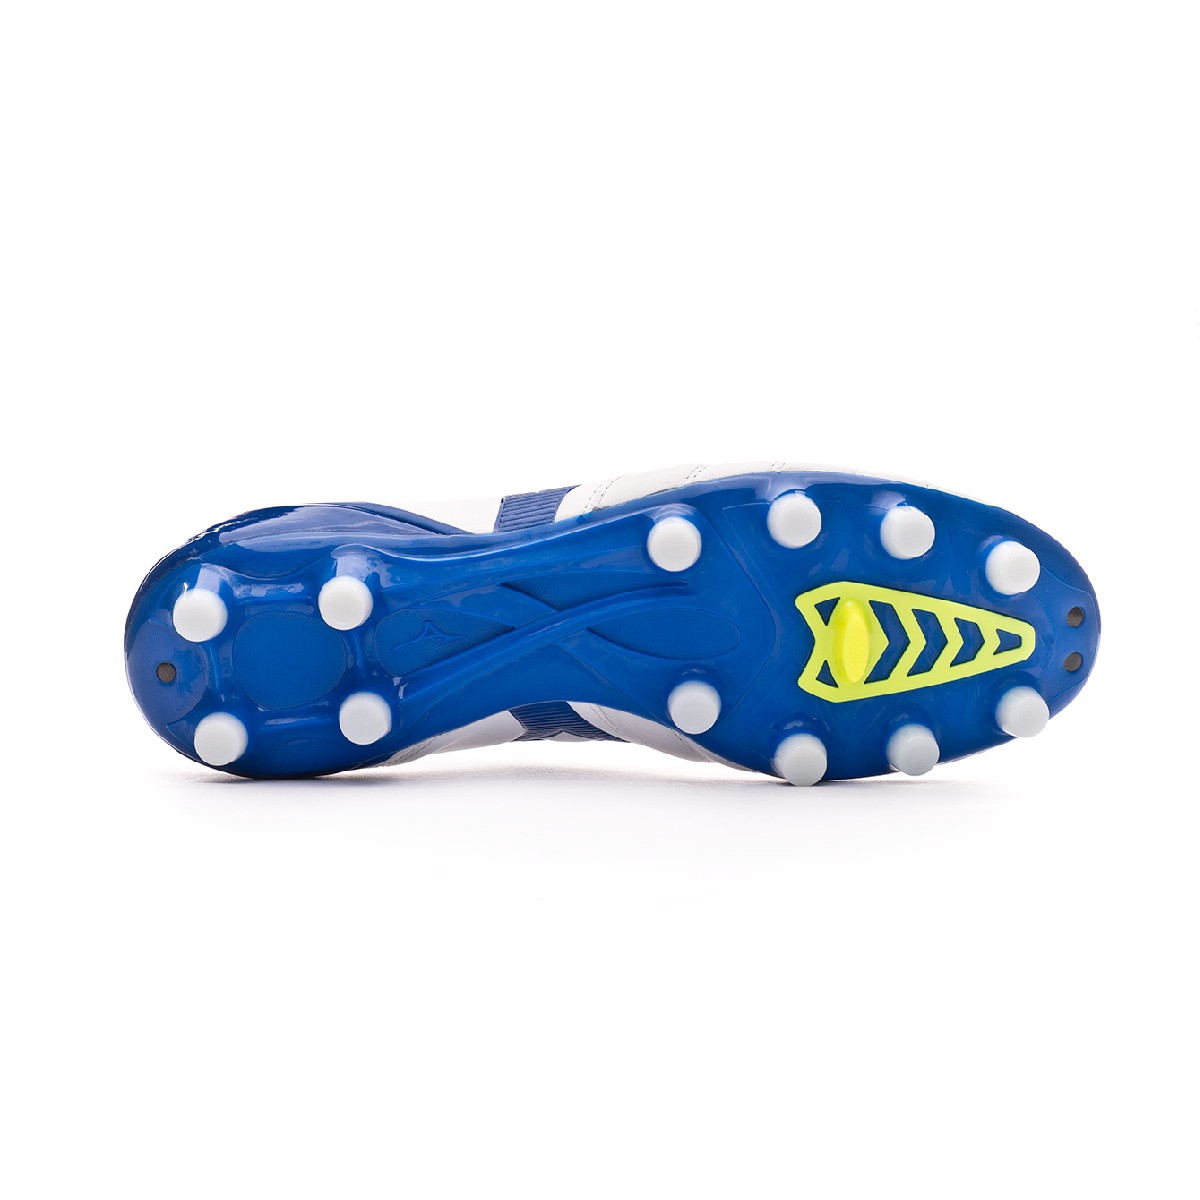 White-Wave Cup Blue-Safety Yellow Mizuno Morelia Neo KL II Chaussure de Foot